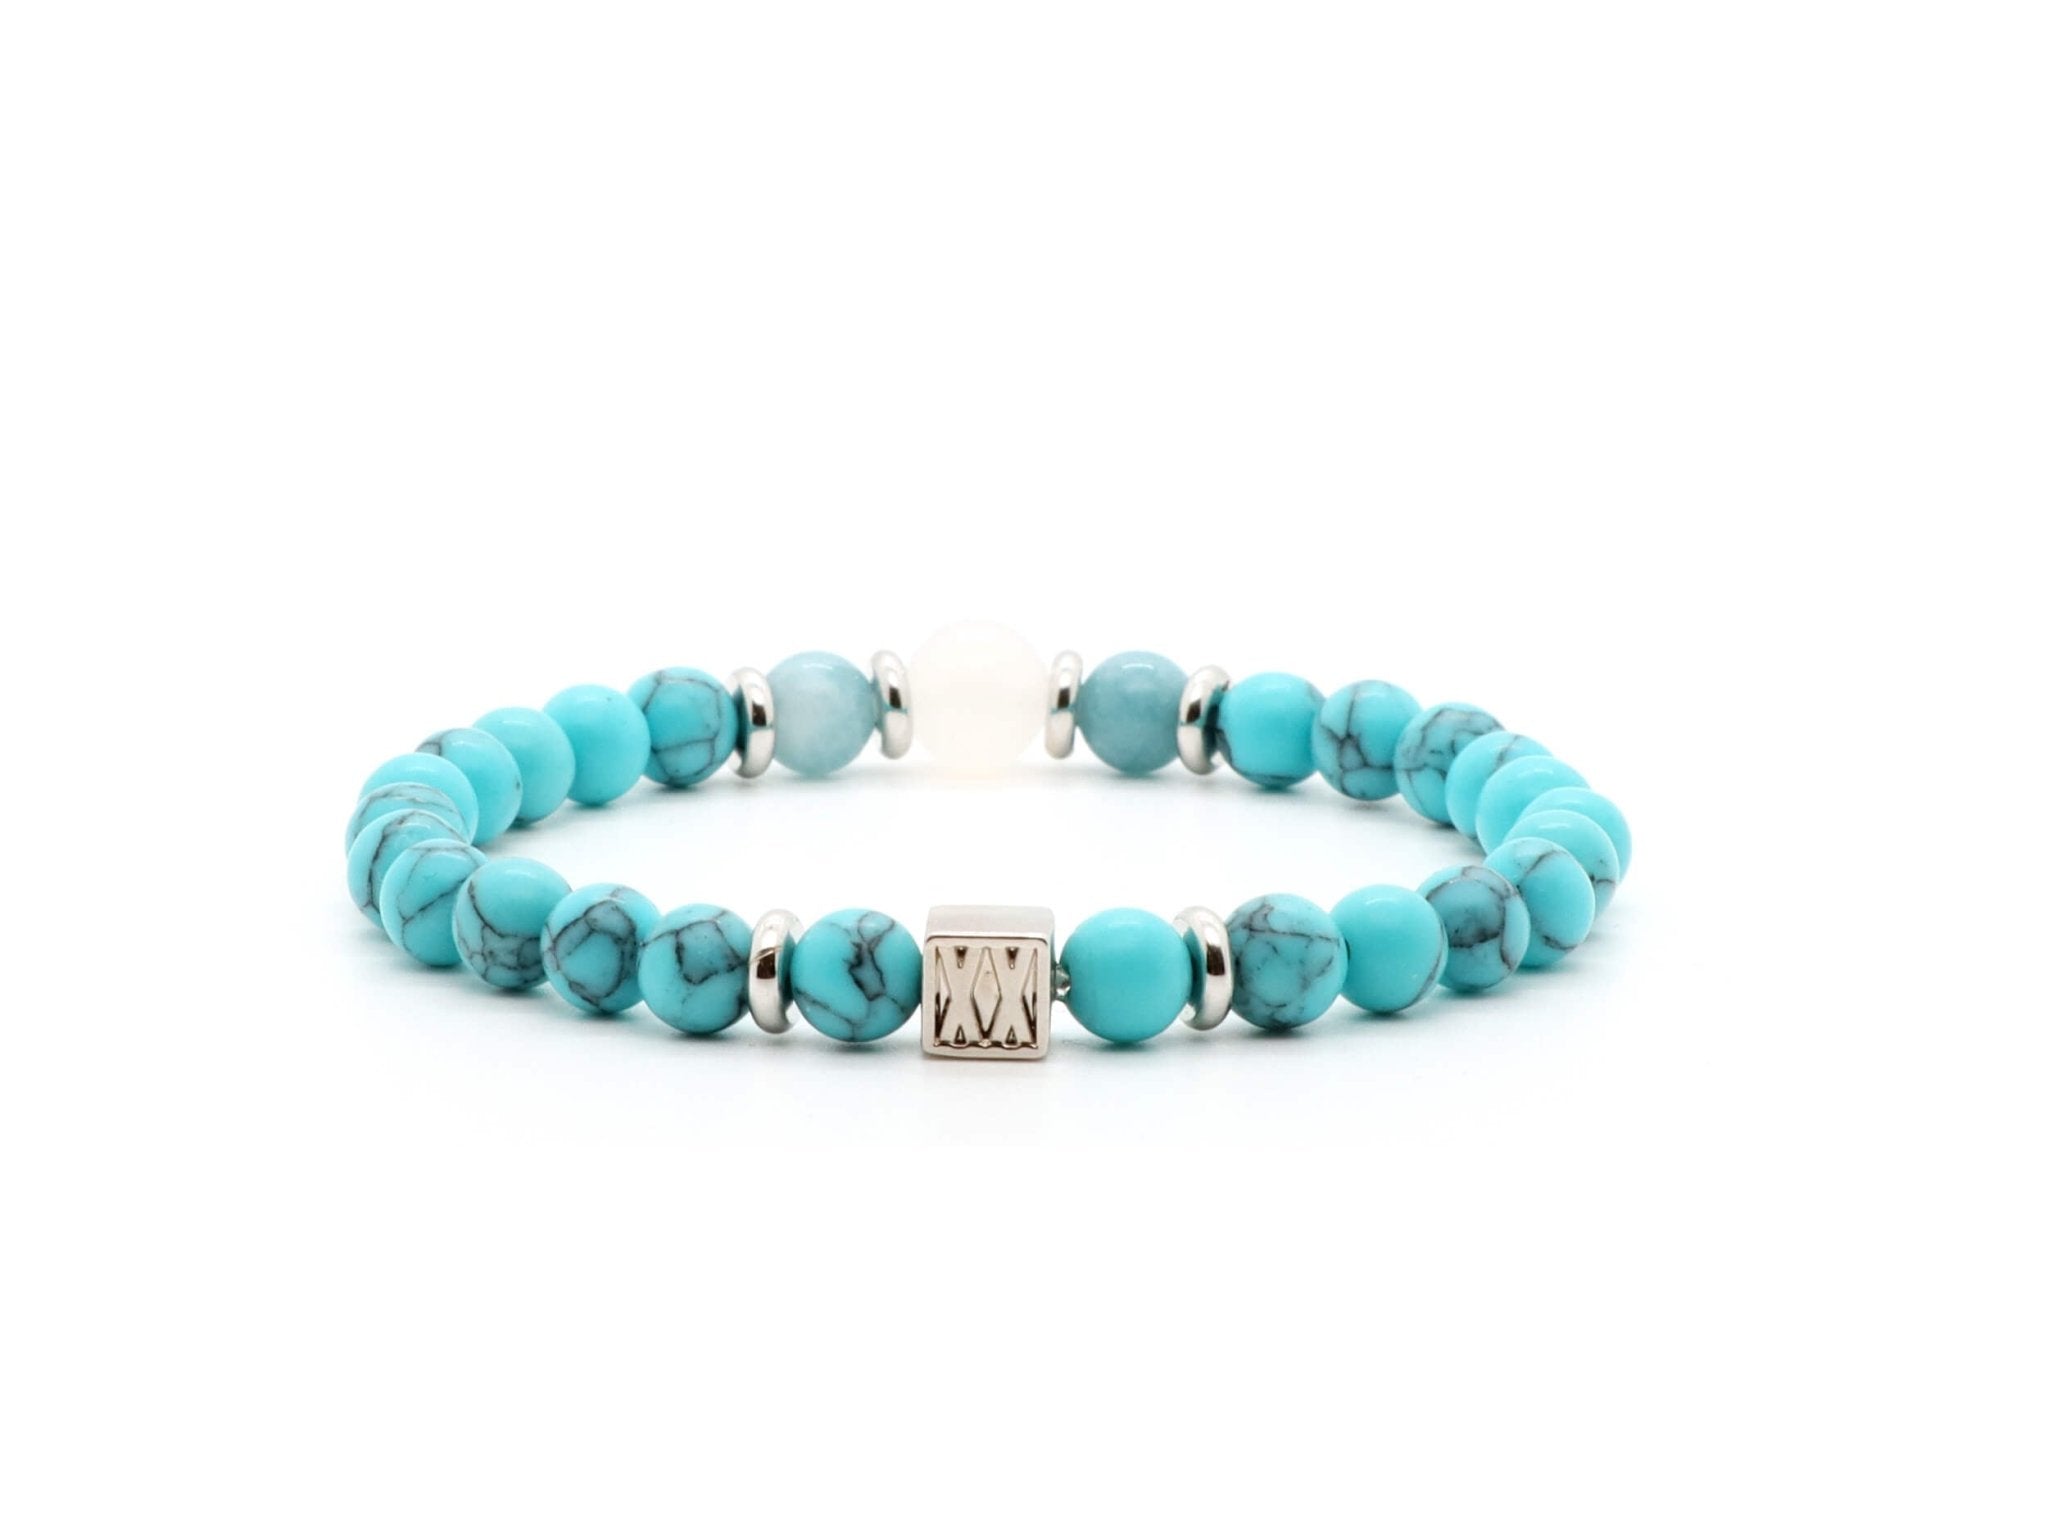 Ladies bracelet with Turquoise with White Agate beads | Natural stone